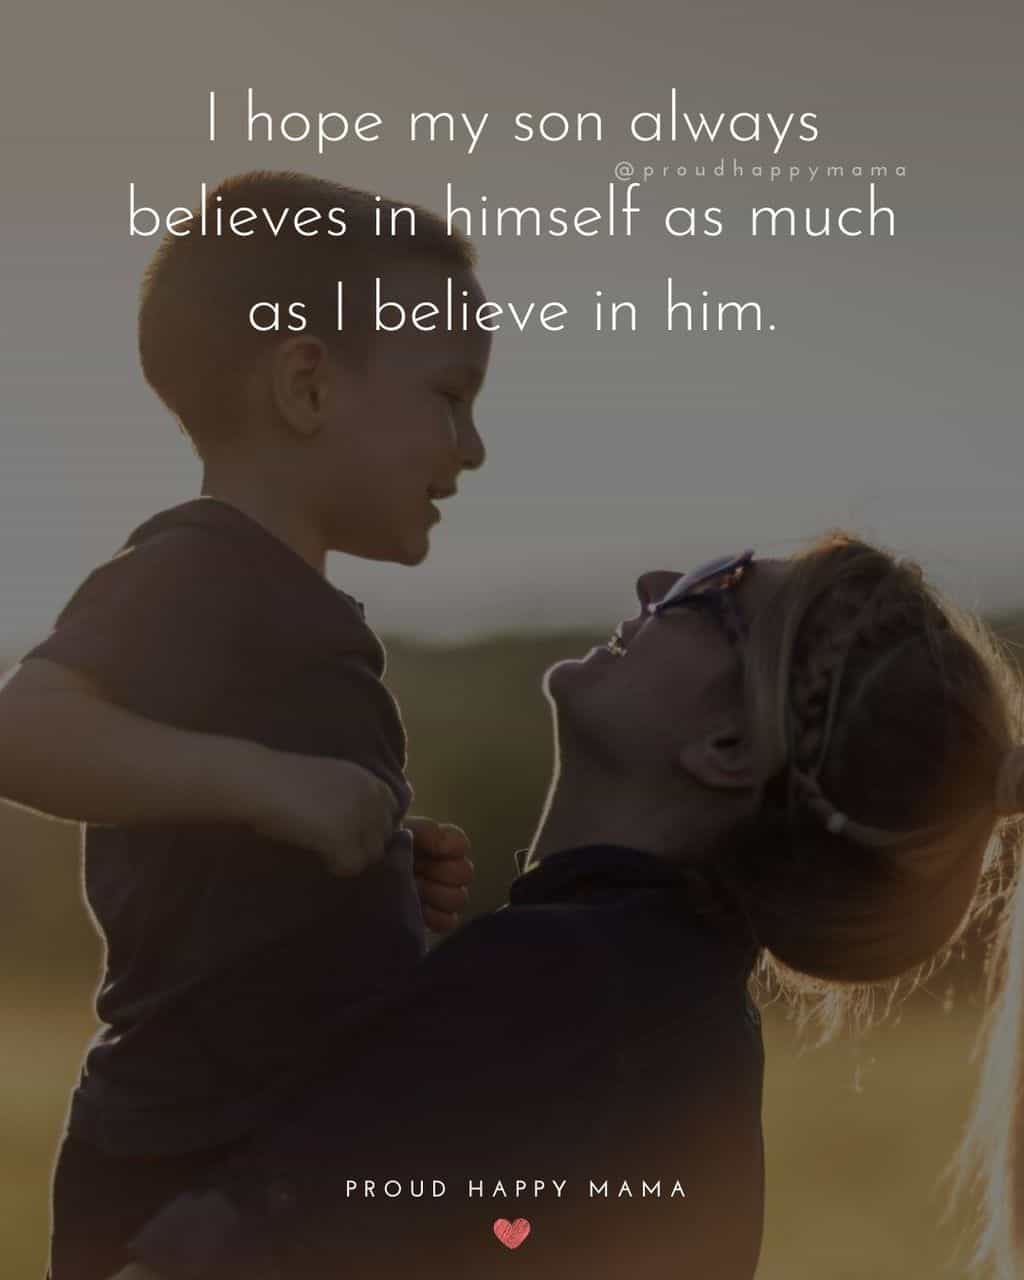 Son Quotes - I hope my son always believes in himself as much as I believe in him.’